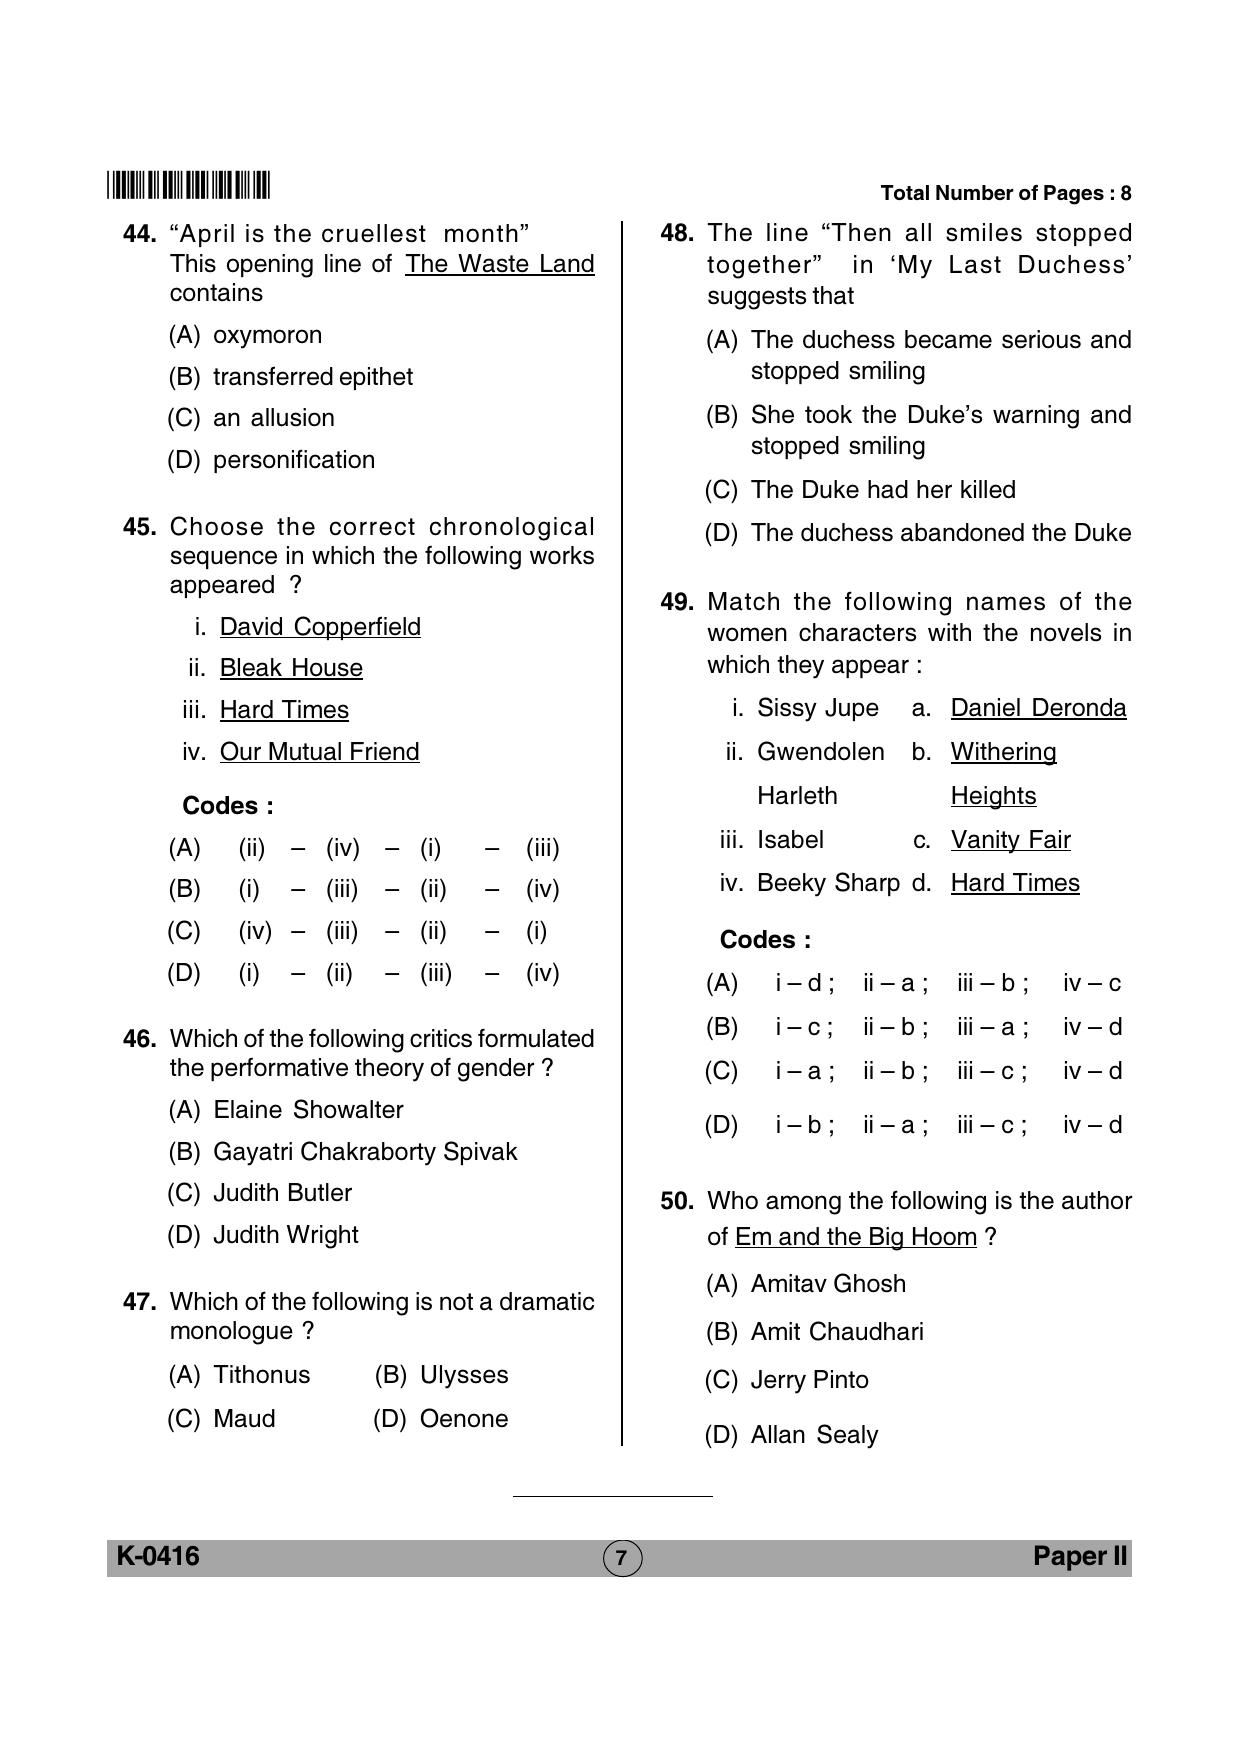 VCRC General English Previous Papers - Page 7